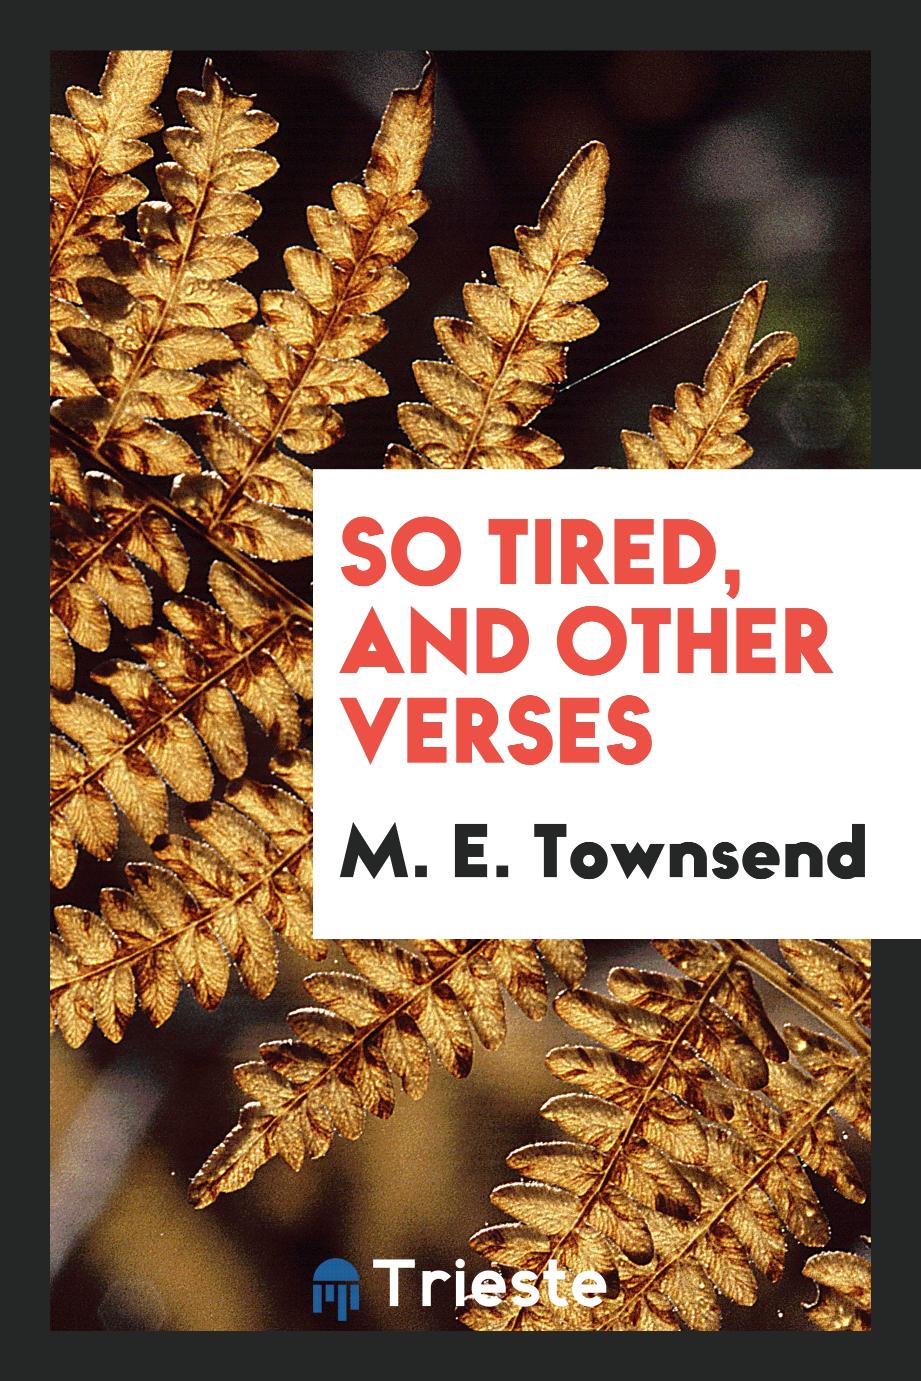 So tired, and other verses